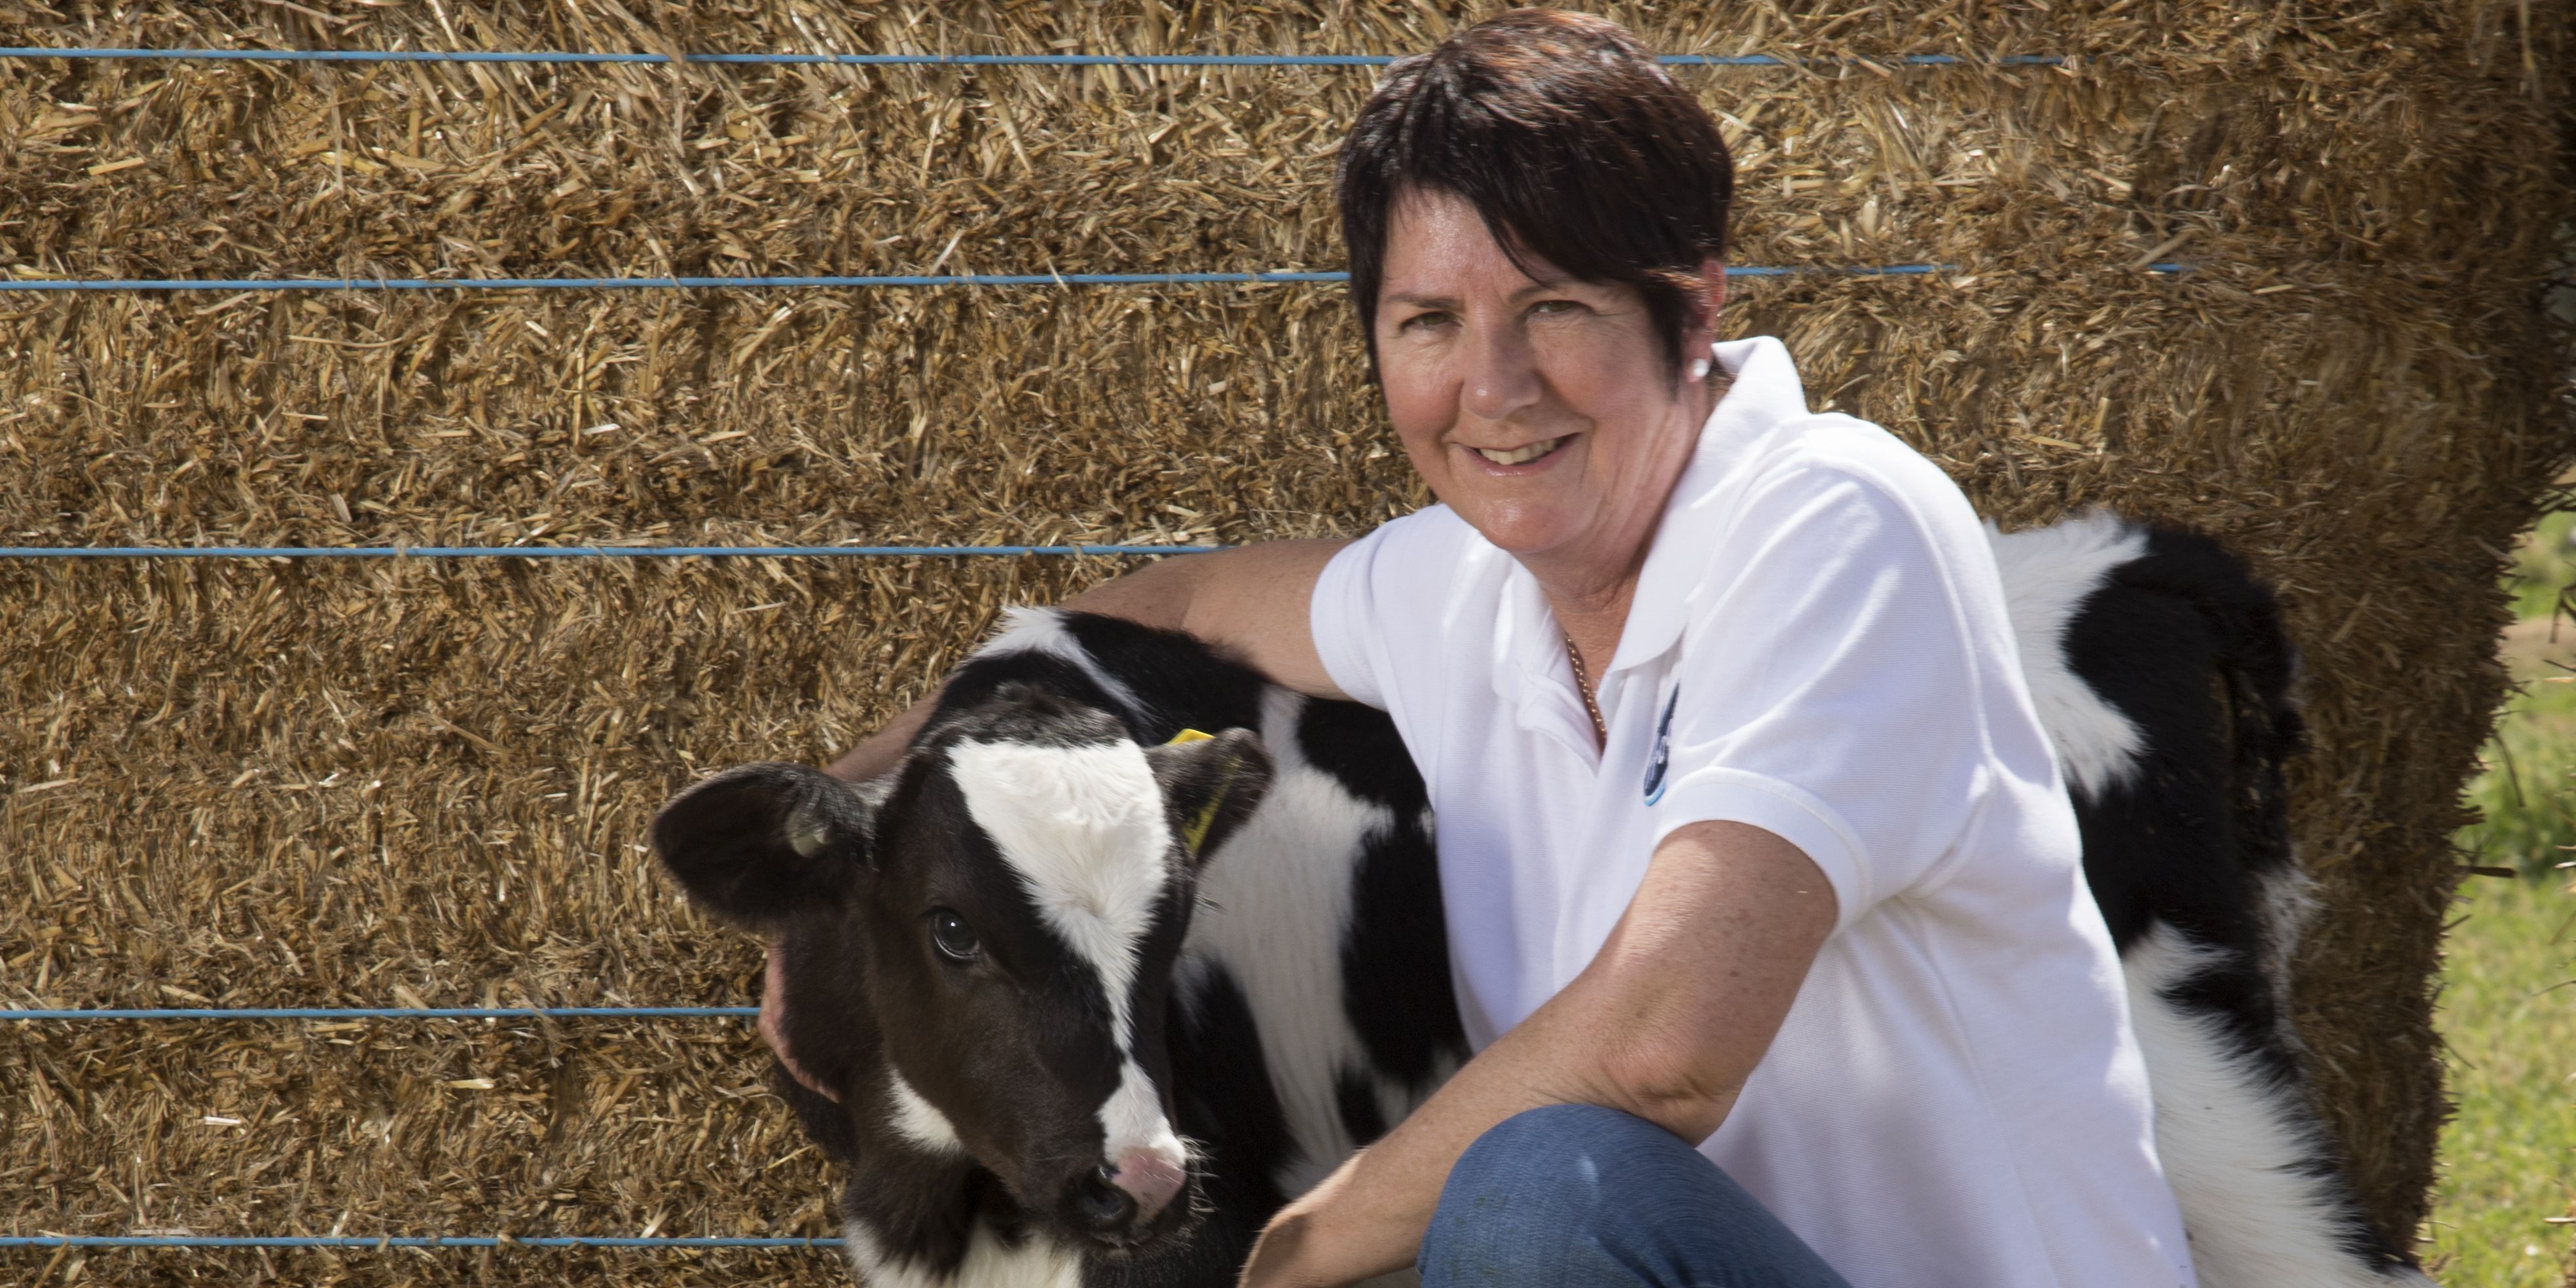 First Person: I’m Sally Mitchell and I’m a dairy farmer